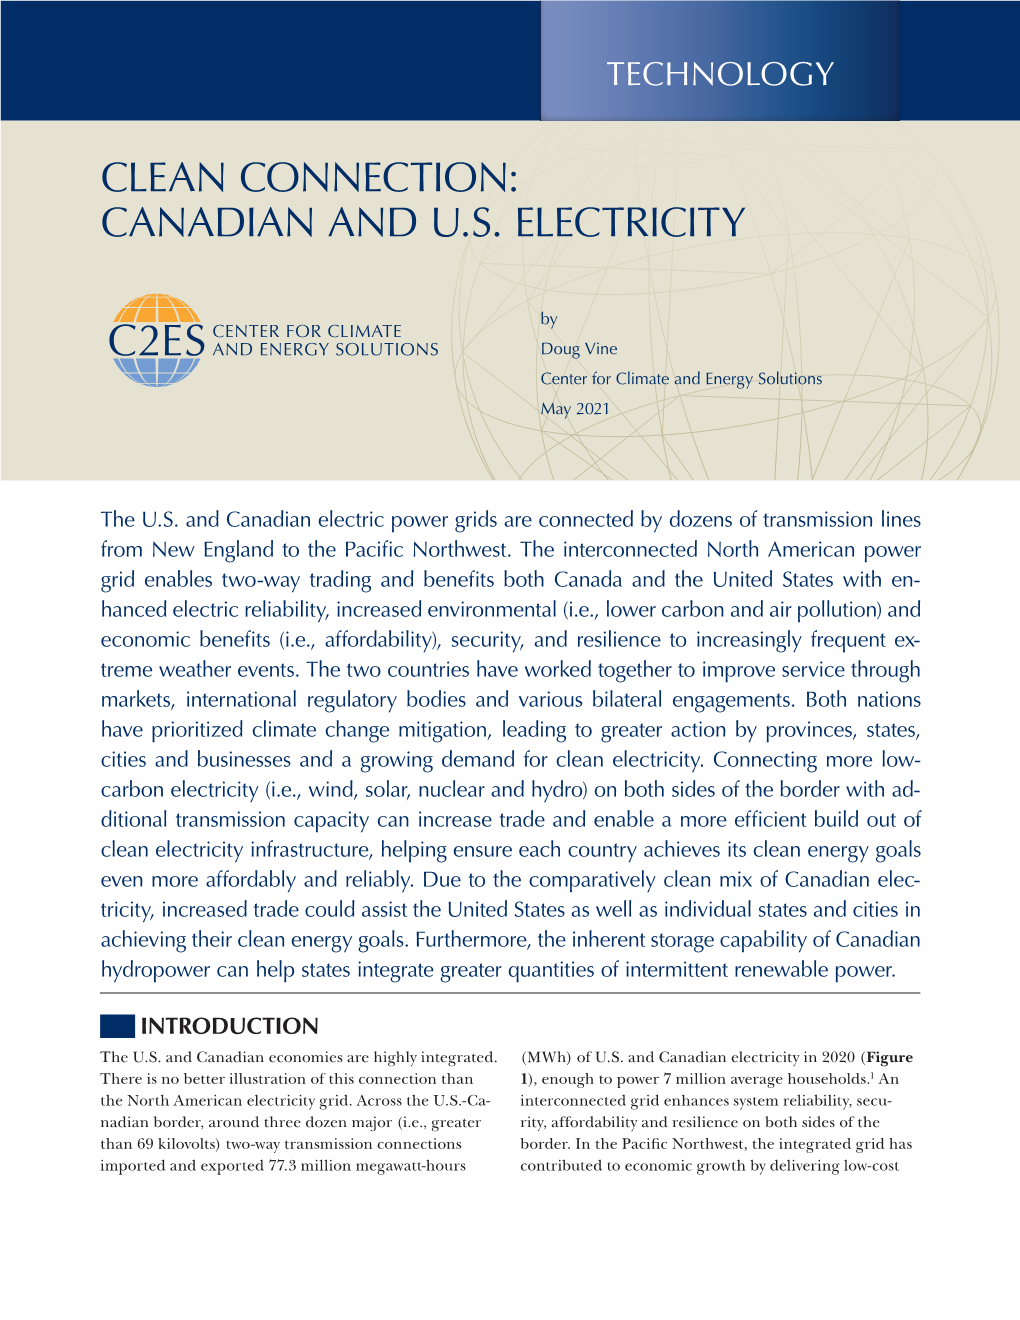 Clean Connection: Canadian and U.S. Electricity